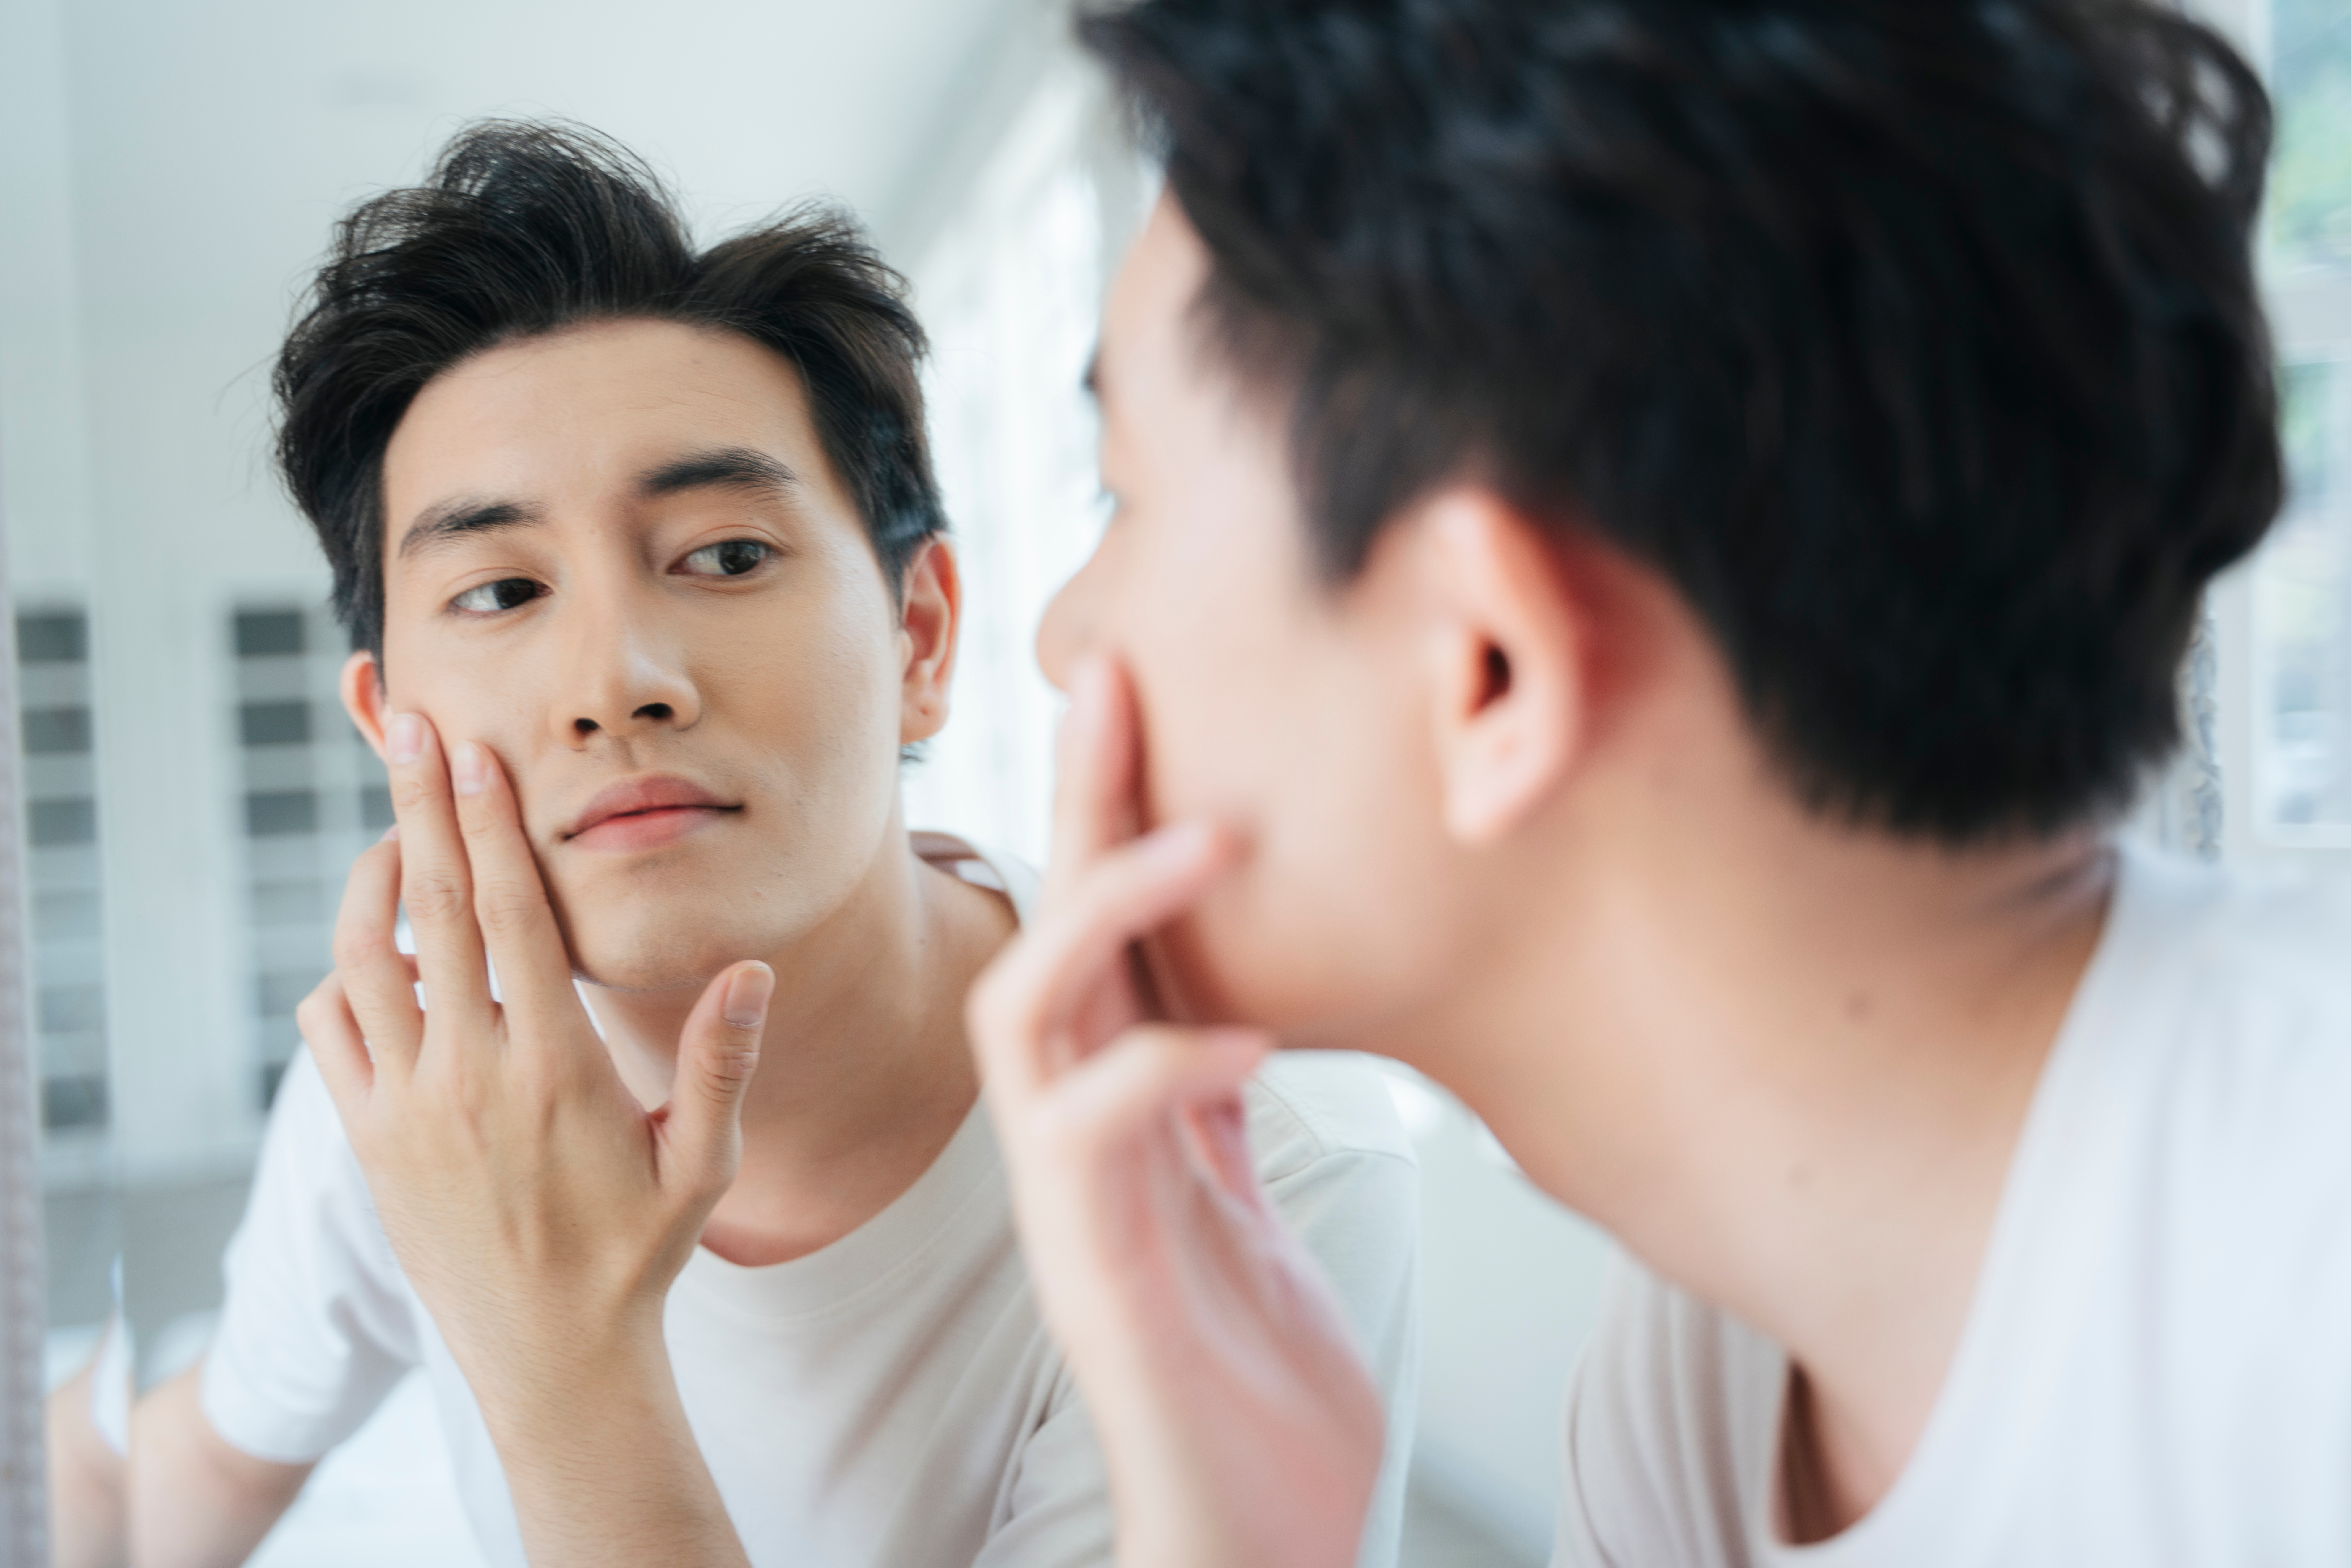 Stock photo of an Asian man looking at himself in the mirror. 